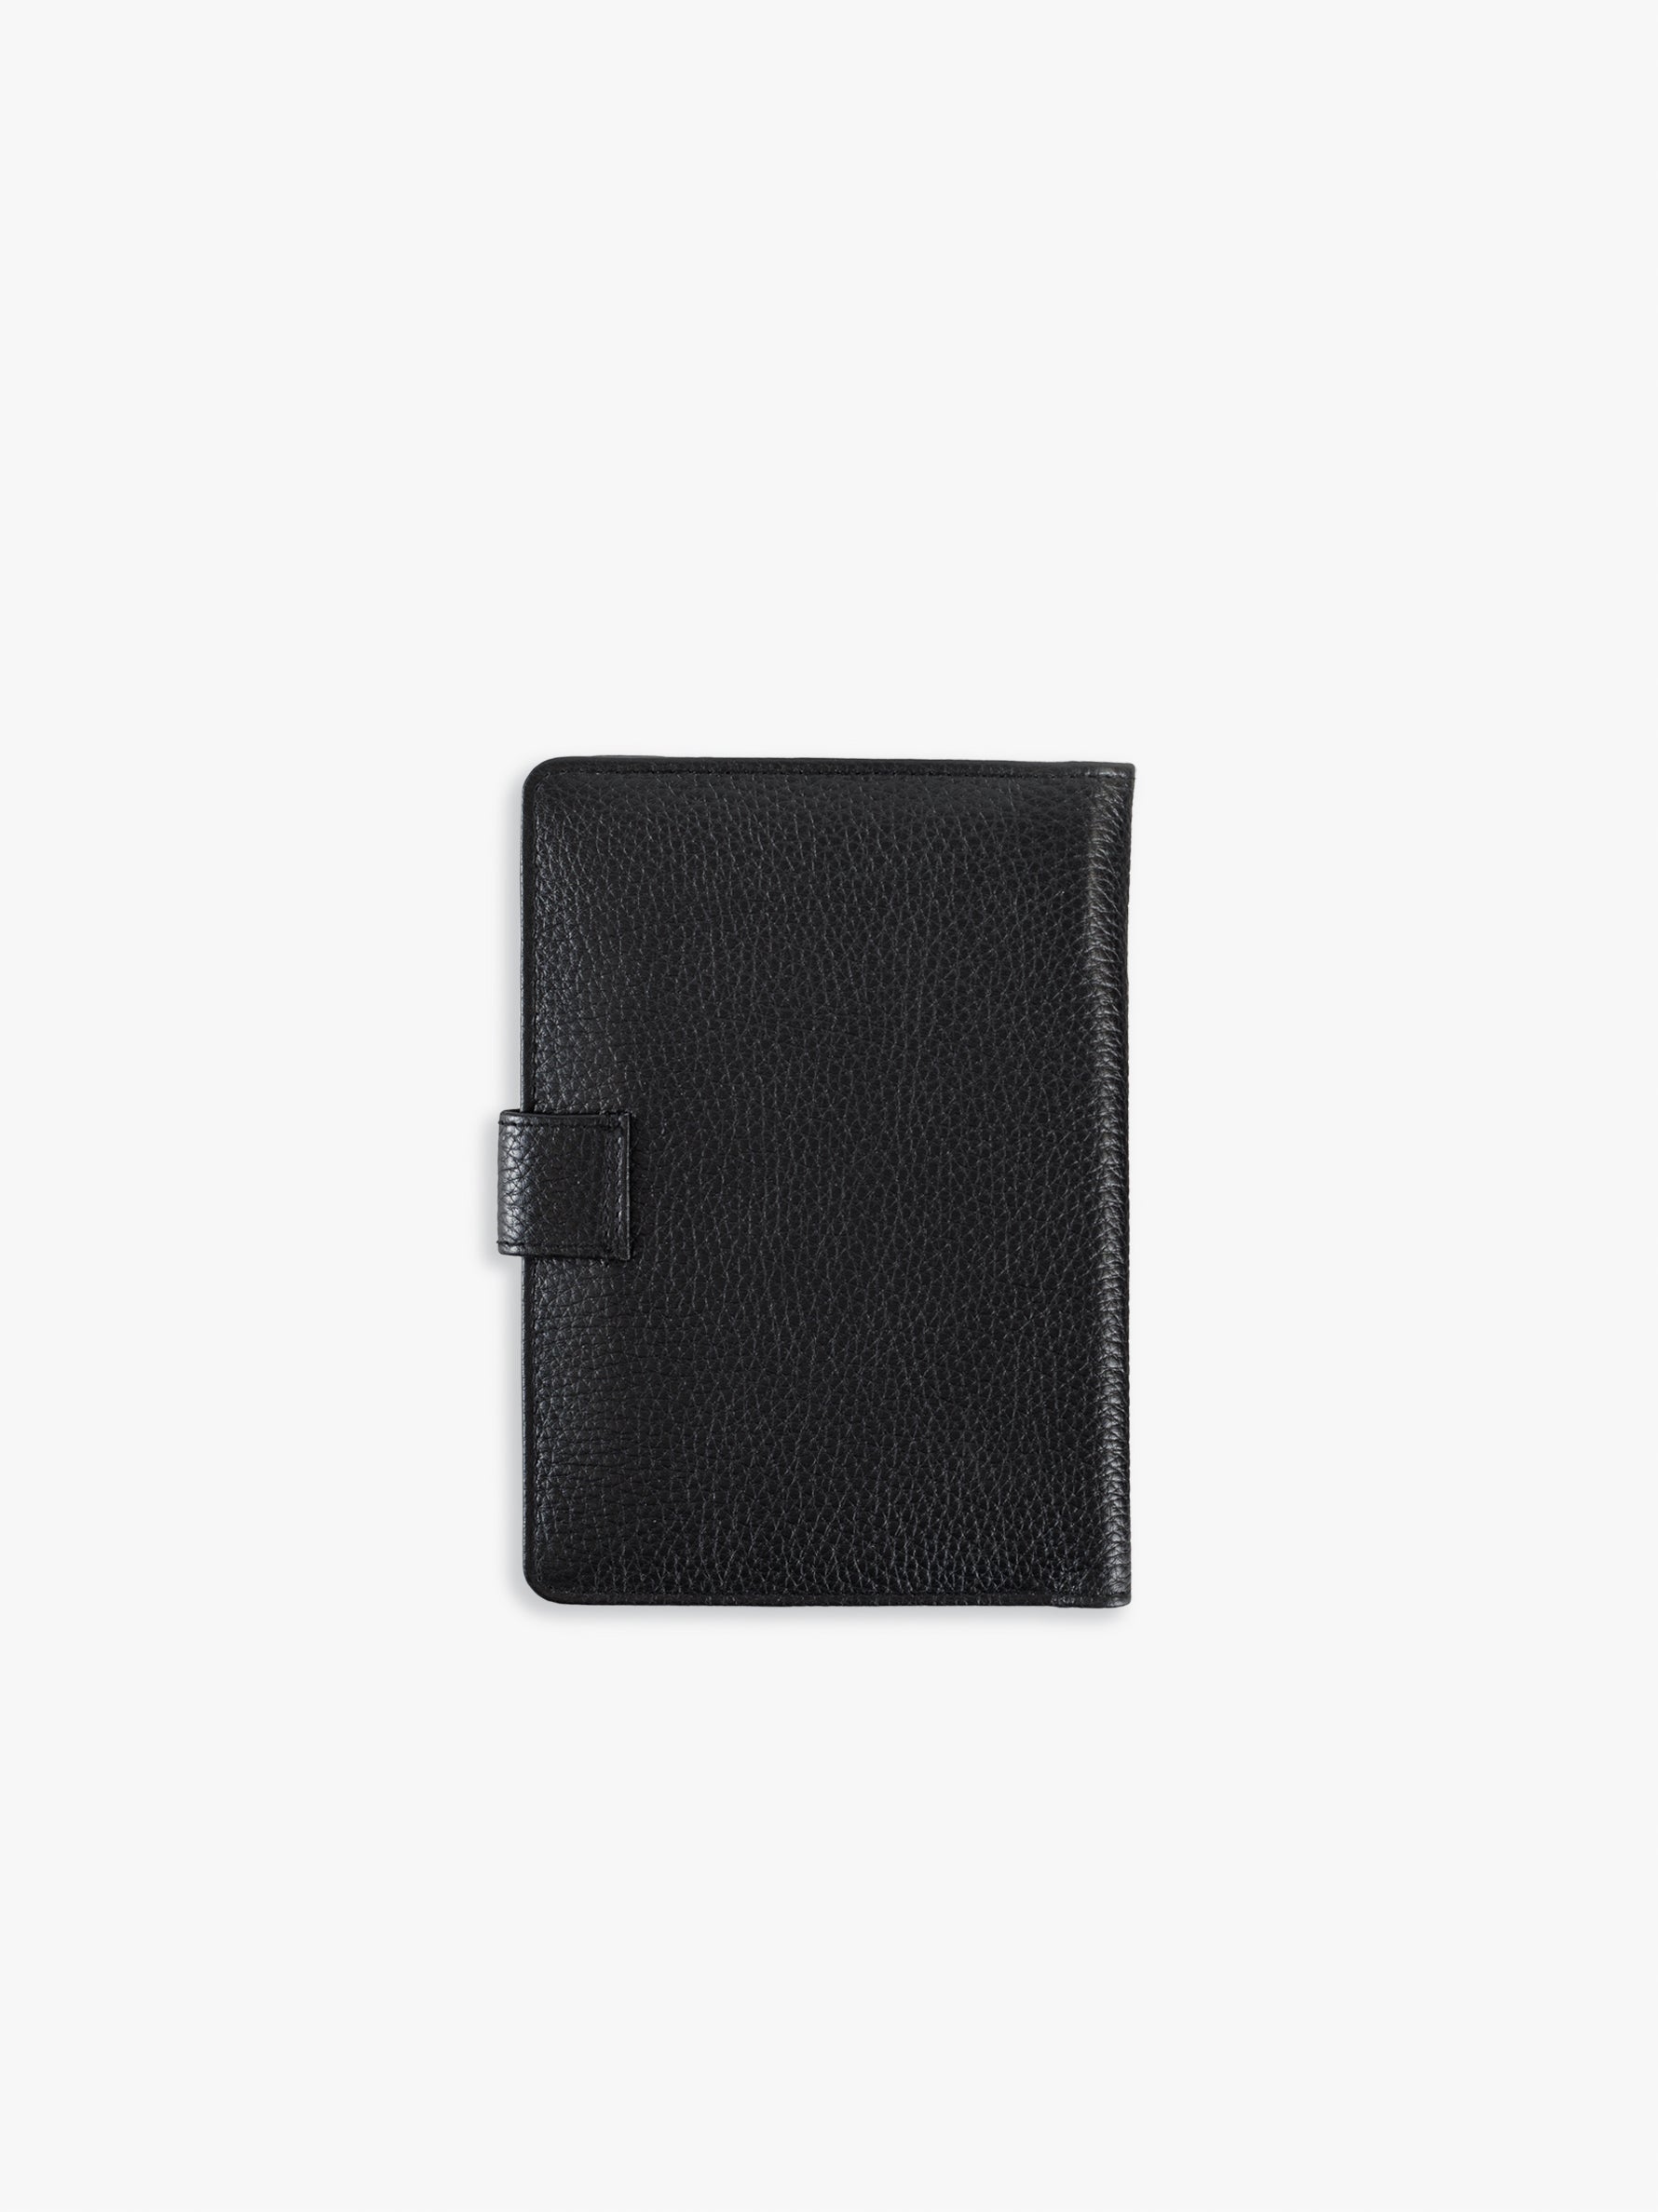 Handcrafted genuine leather Jetsetter Passport Case for women Classic Black